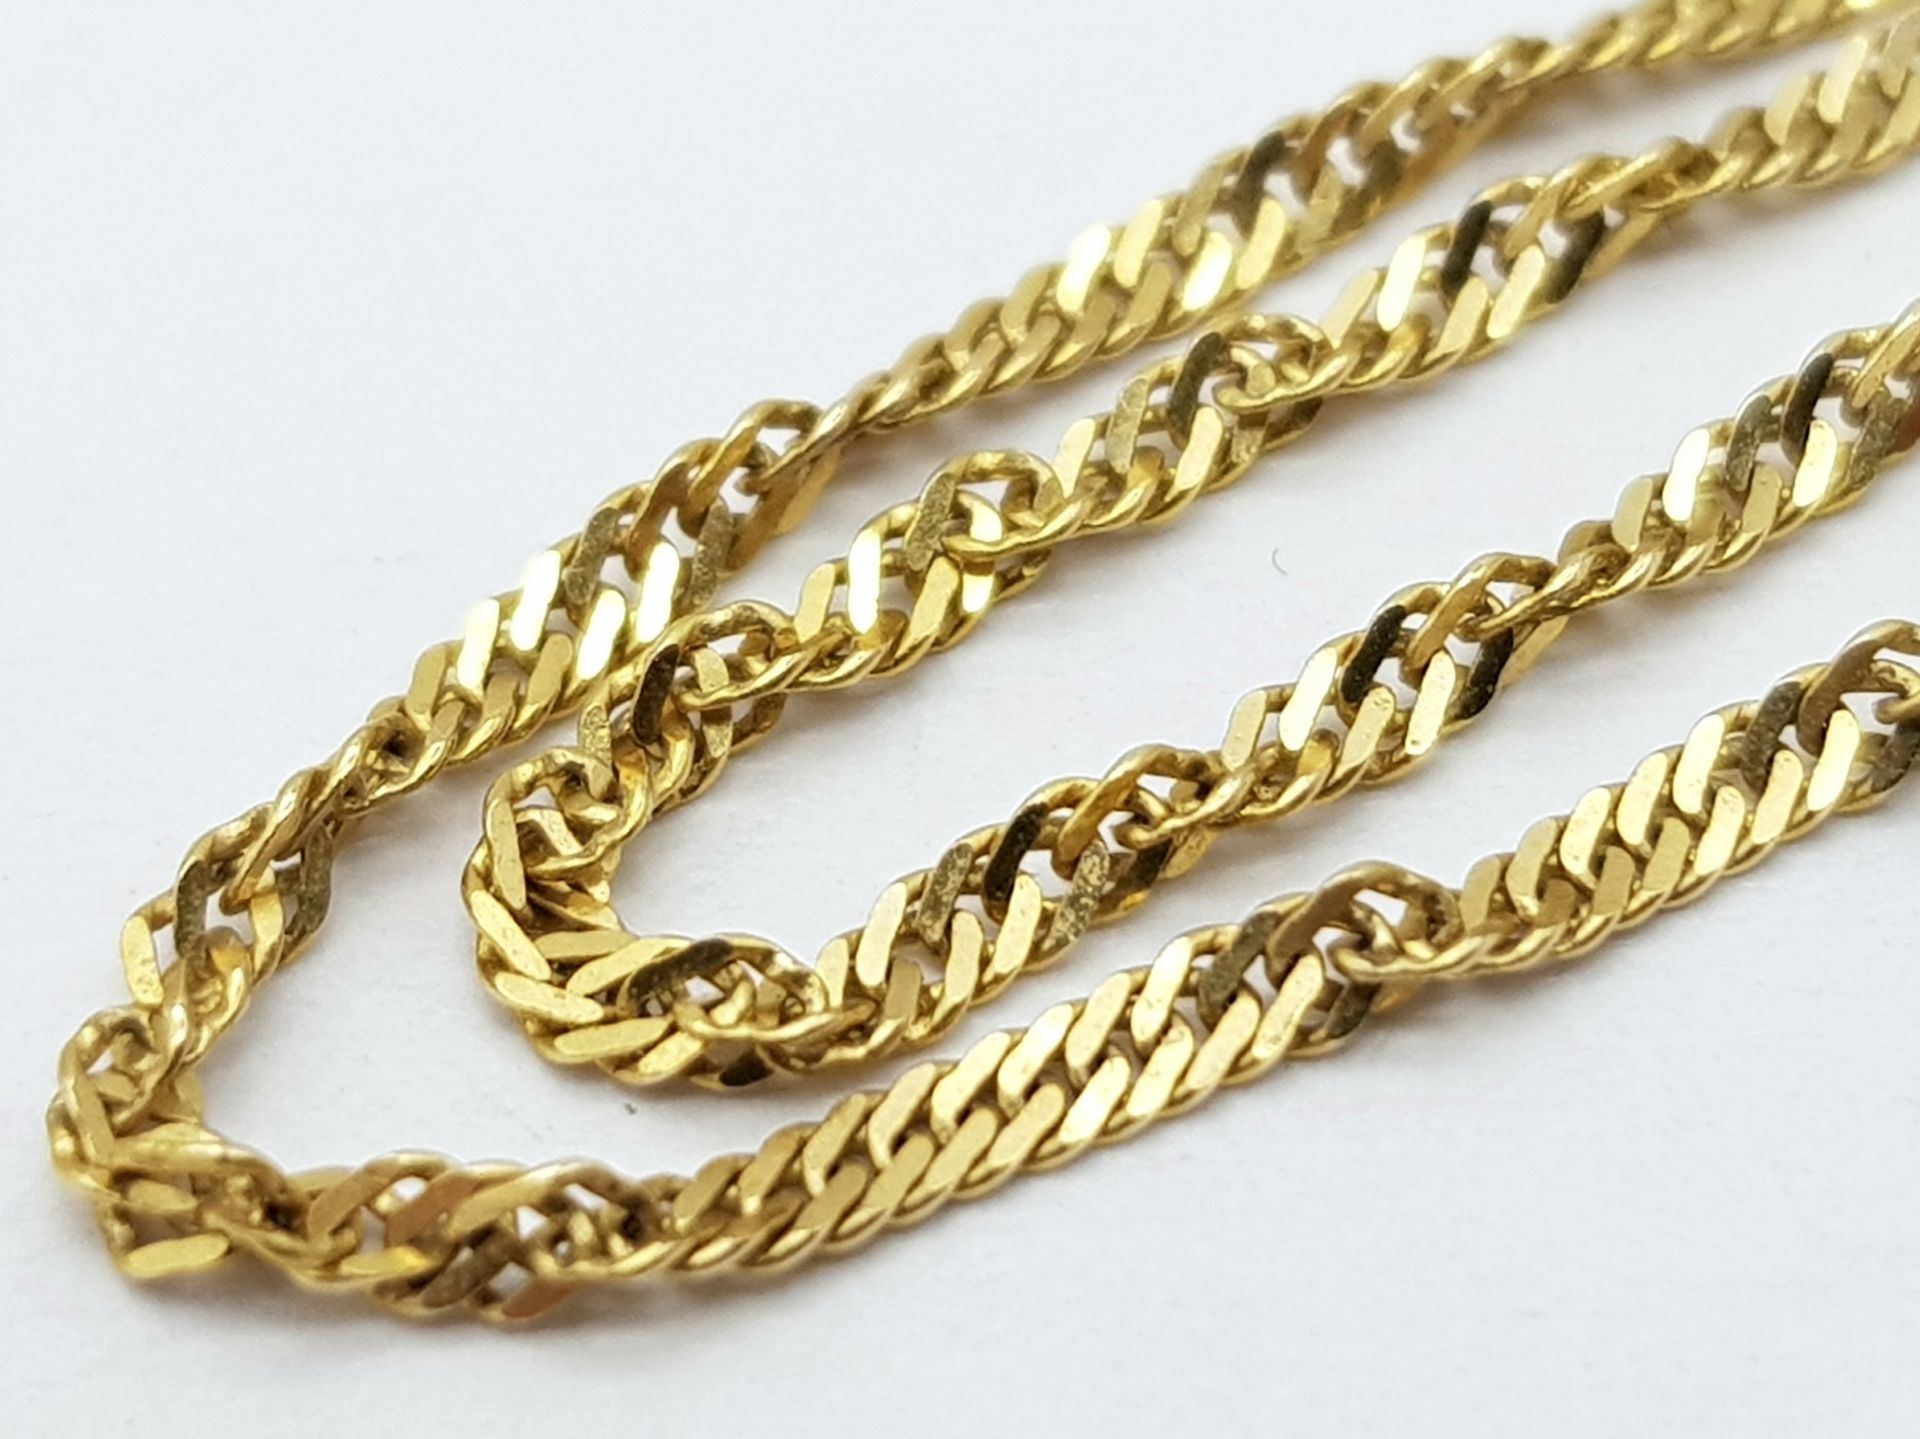 A 9K Yellow Gold Small Twist Curb Link Necklace. 44cm. 1.75g - Image 5 of 5